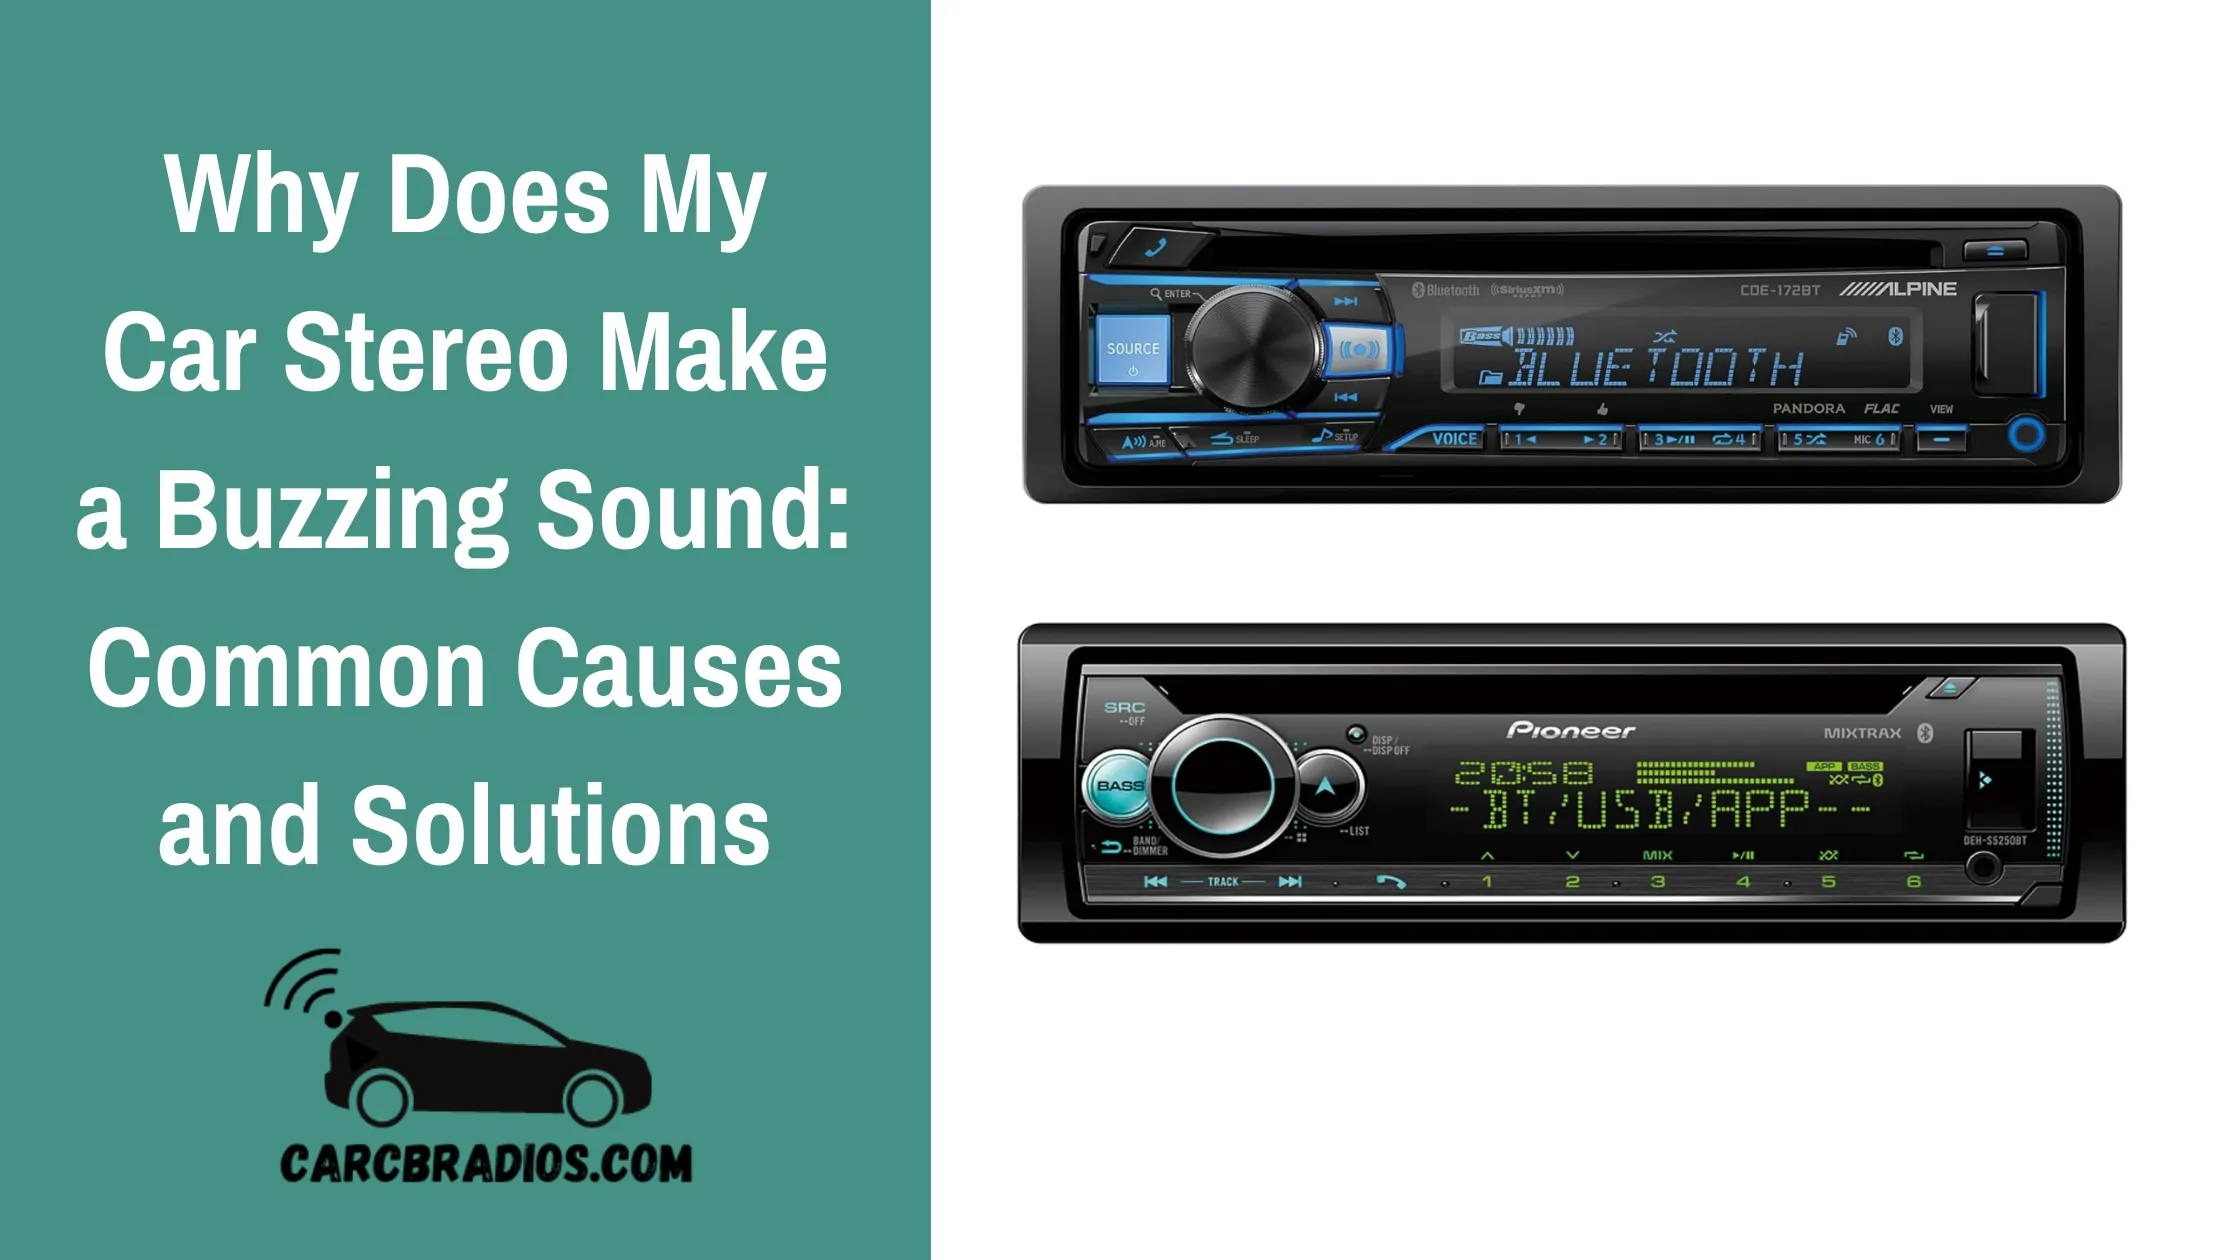 Car radios have come a long way since their inception, and they are now more complex than ever before. As a result, diagnosing and correcting issues with car radios can be challenging. In this article, I will provide possible reasons and remedies for a buzzing sound in car stereos and compare aftermarket car audio to factory car audio. Additionally, I will delve into the history of car radios to understand how they have evolved over the years.